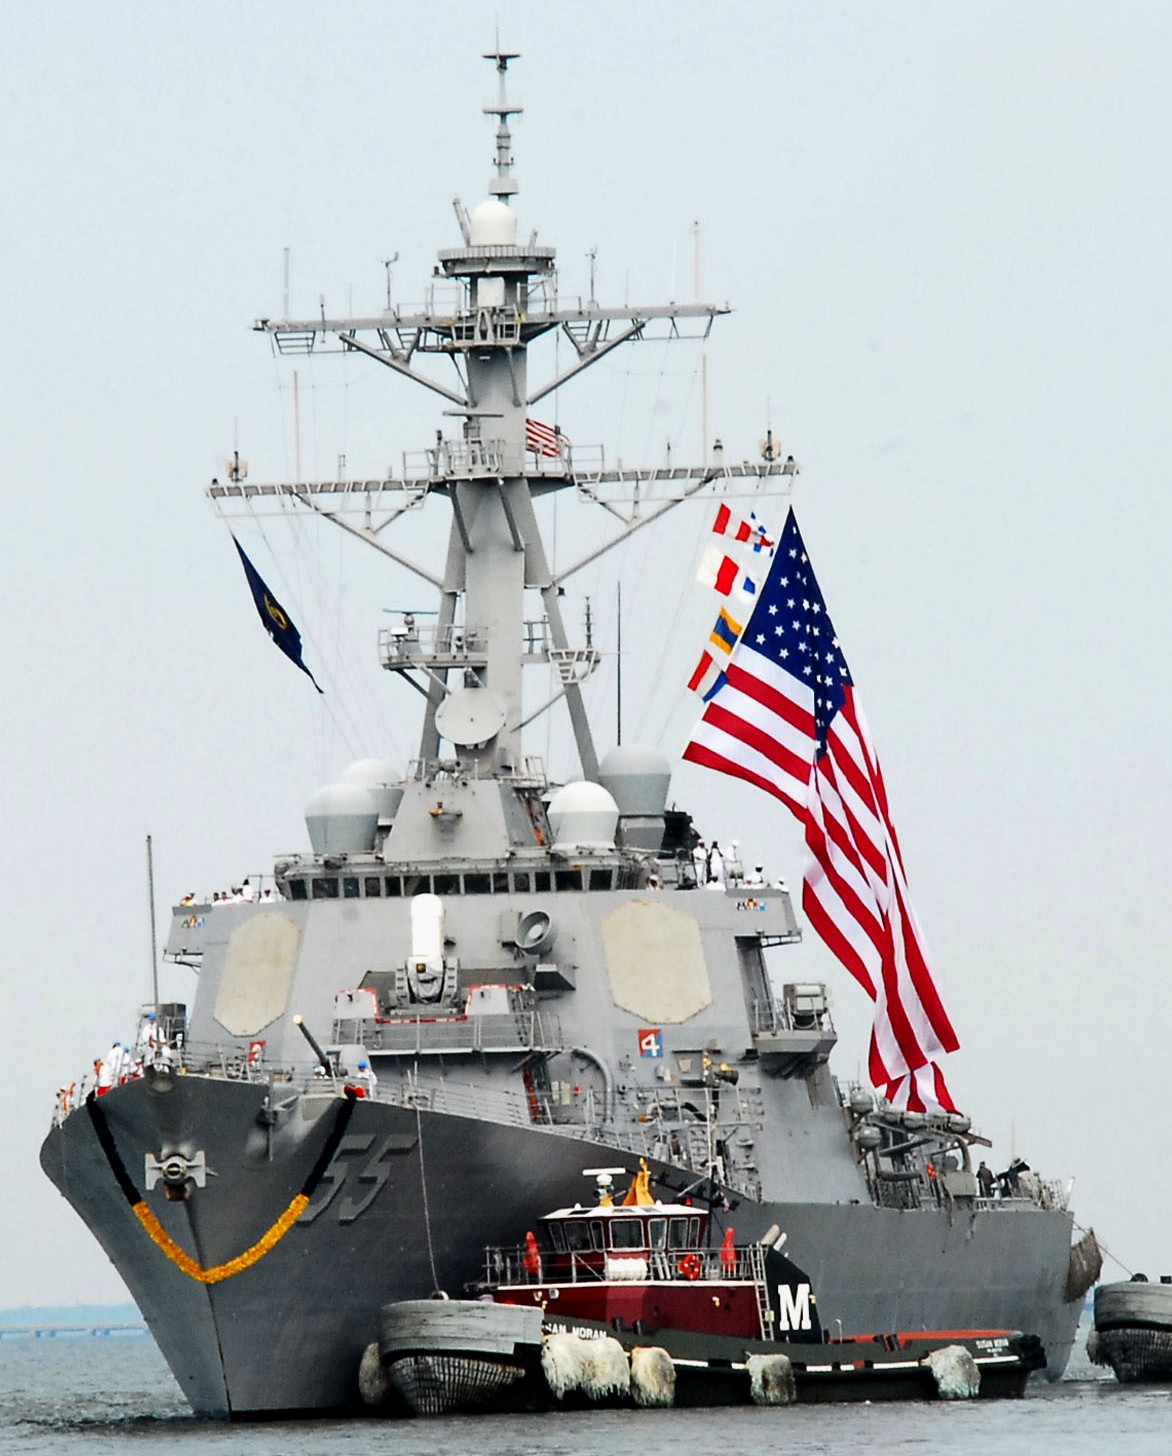 ddg-55 uss stout guided missile destroyer us navy 77